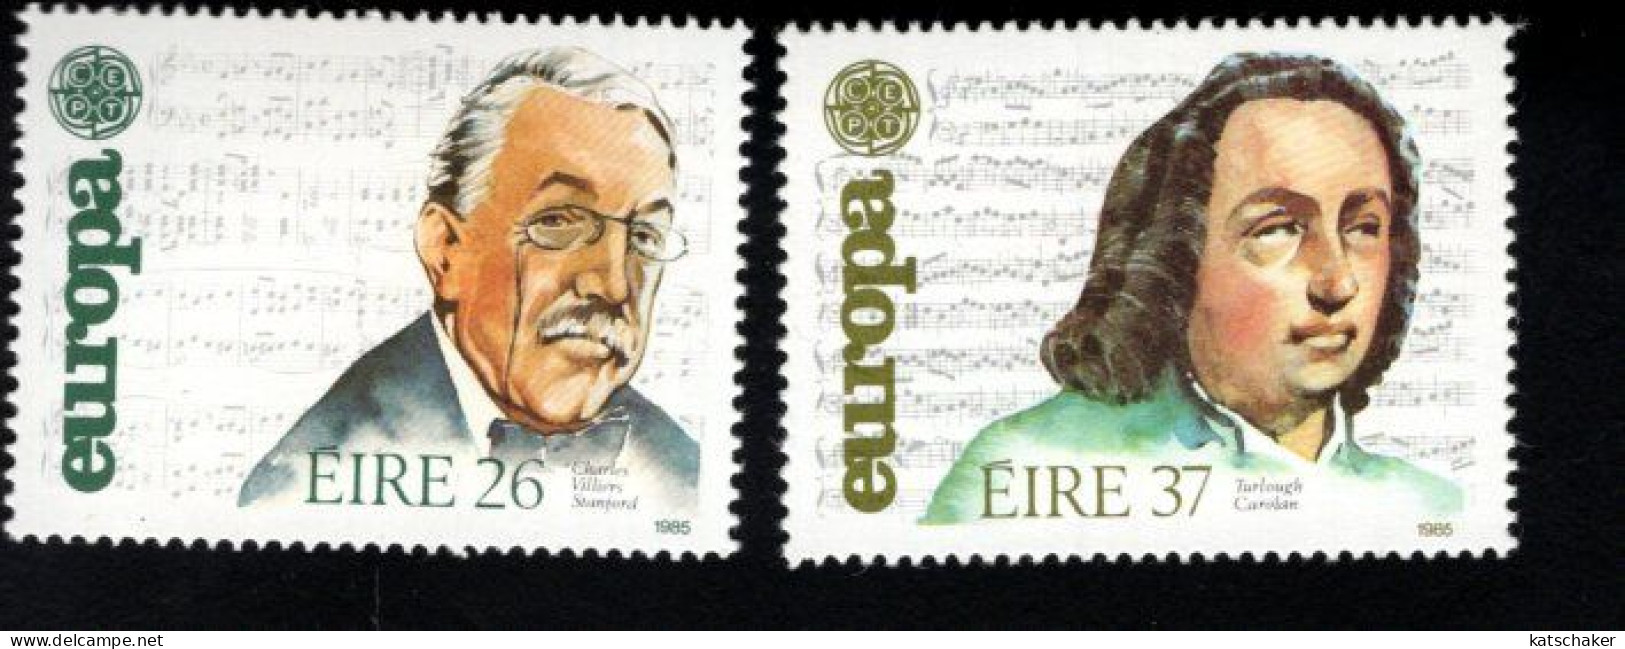 1998796430 1985  SCOTT 616 617 (XX) POSTFRIS  MINT NEVER HINGED - EUROPA ISSUE - COMPOSERS - STANFORD - O'CAROLAN - Neufs